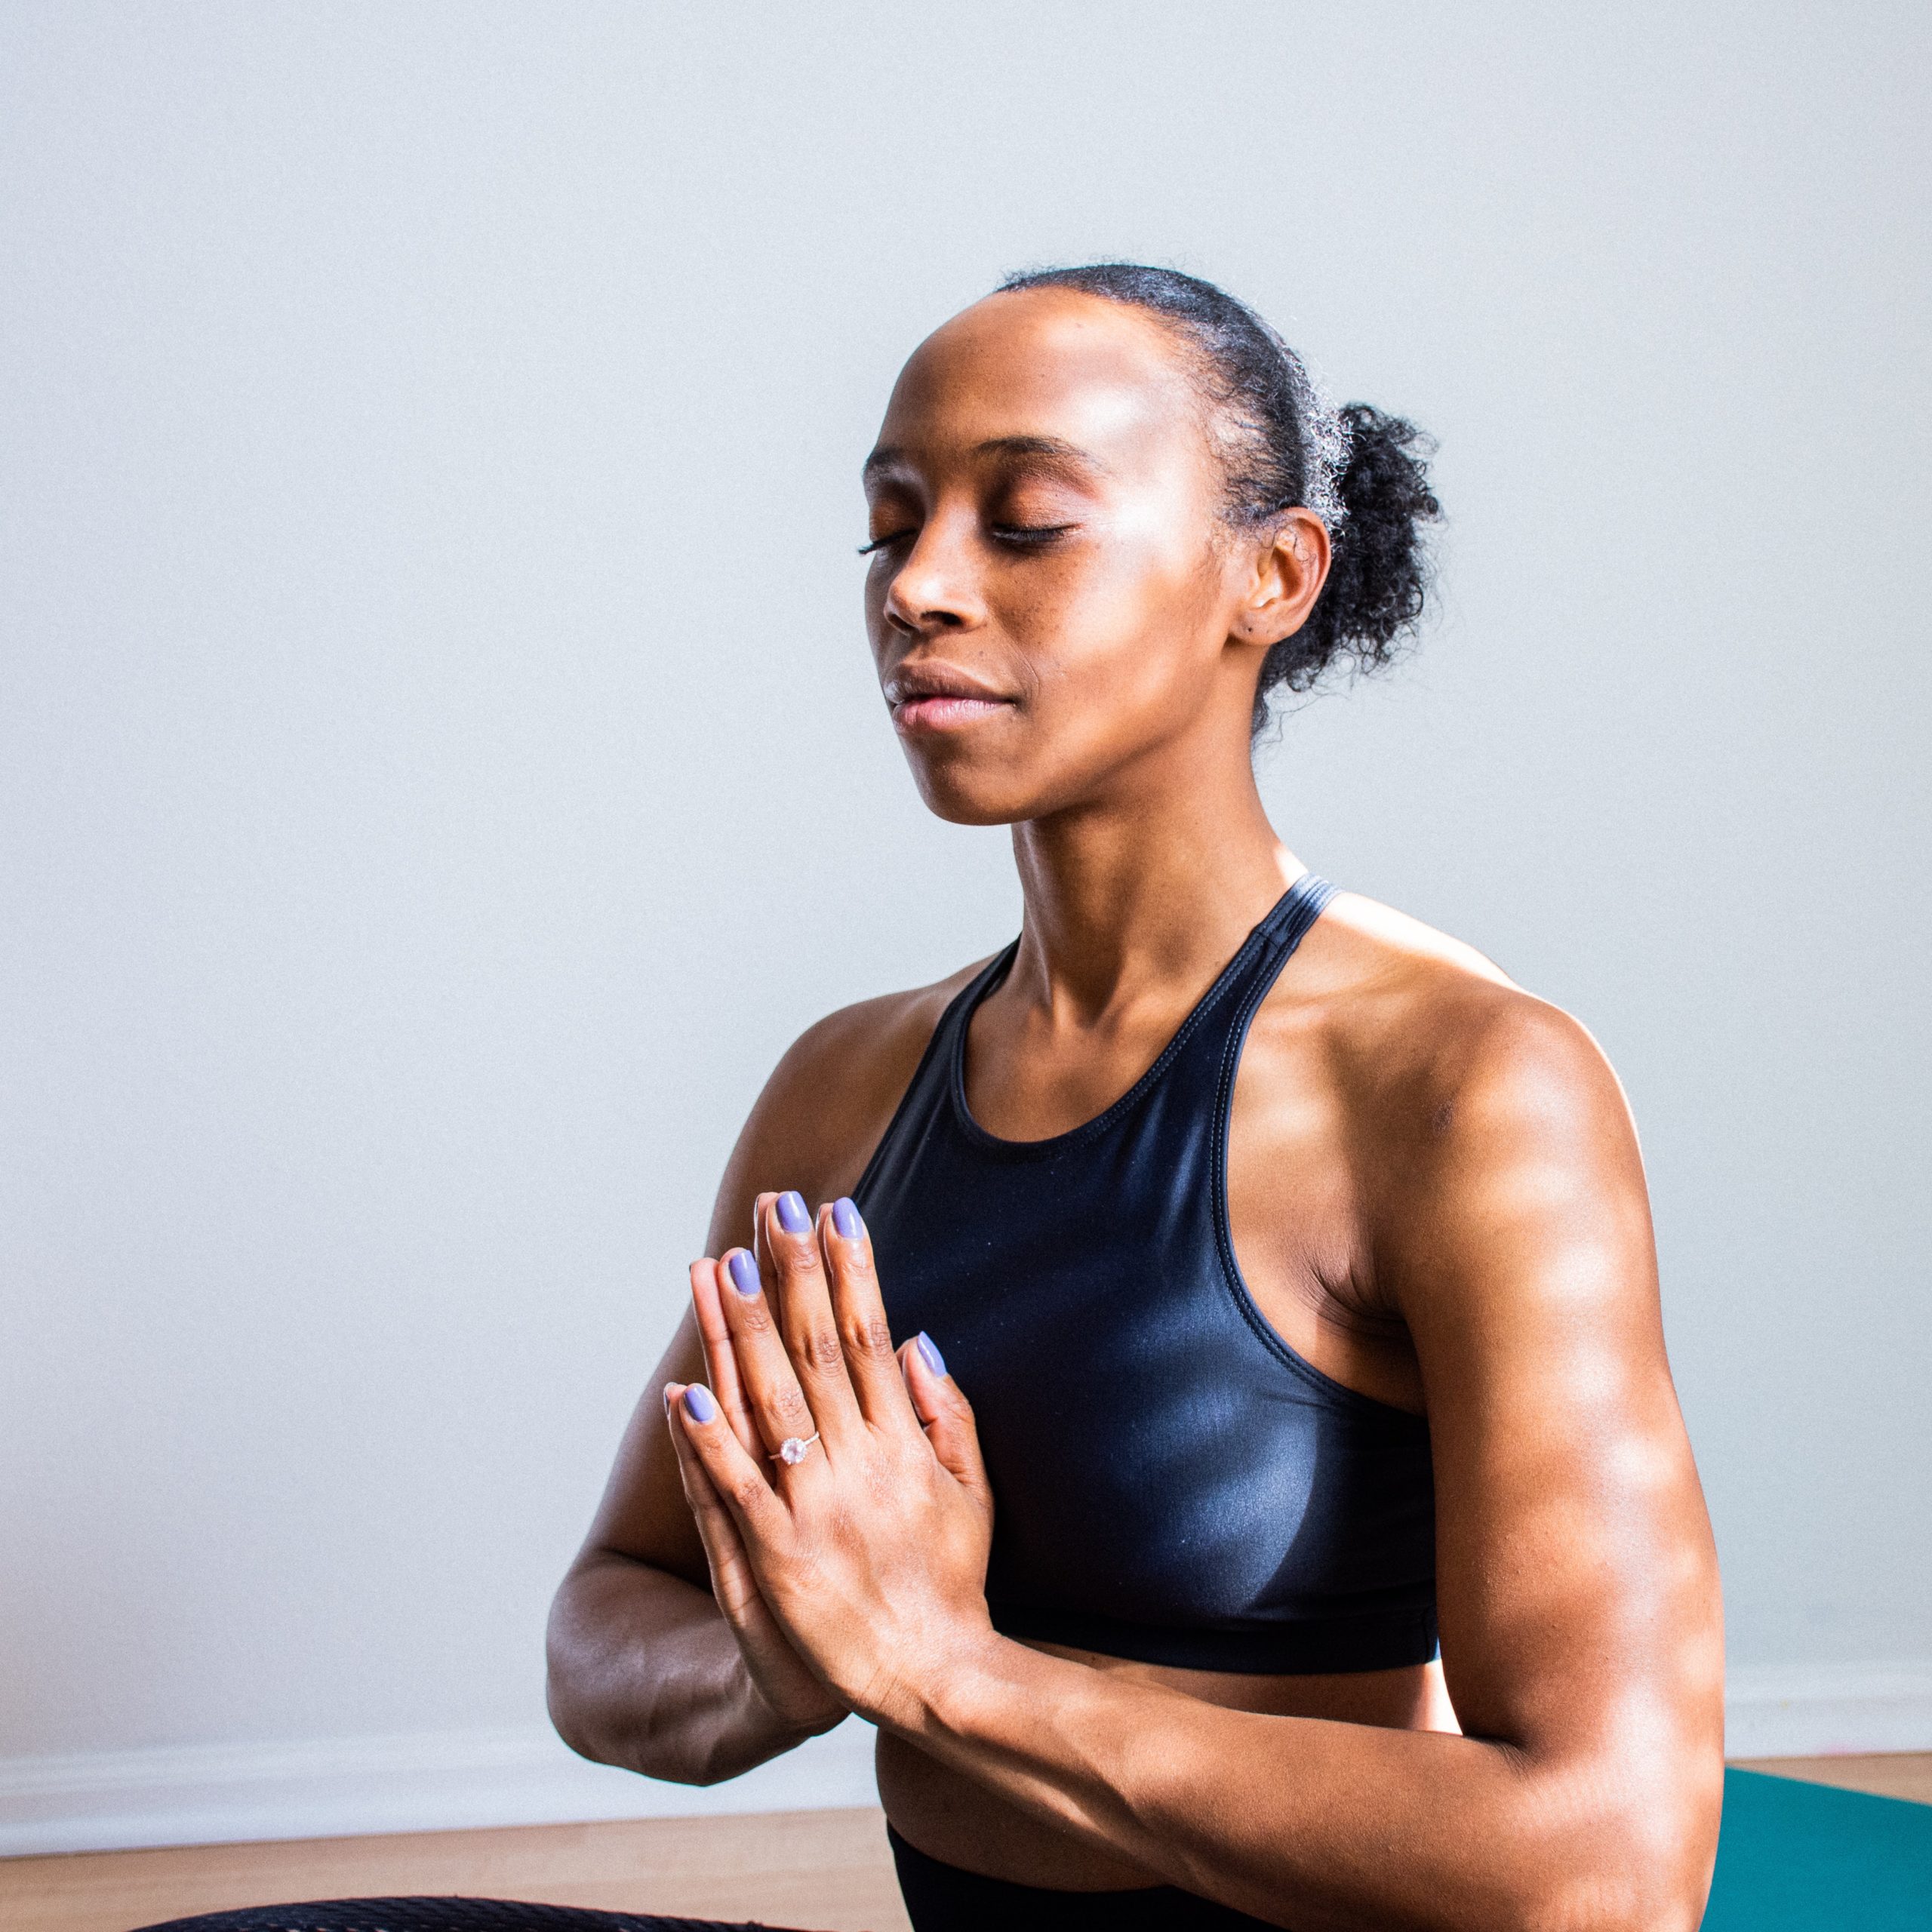 Woman with closed eyes concentrating during yoga pose